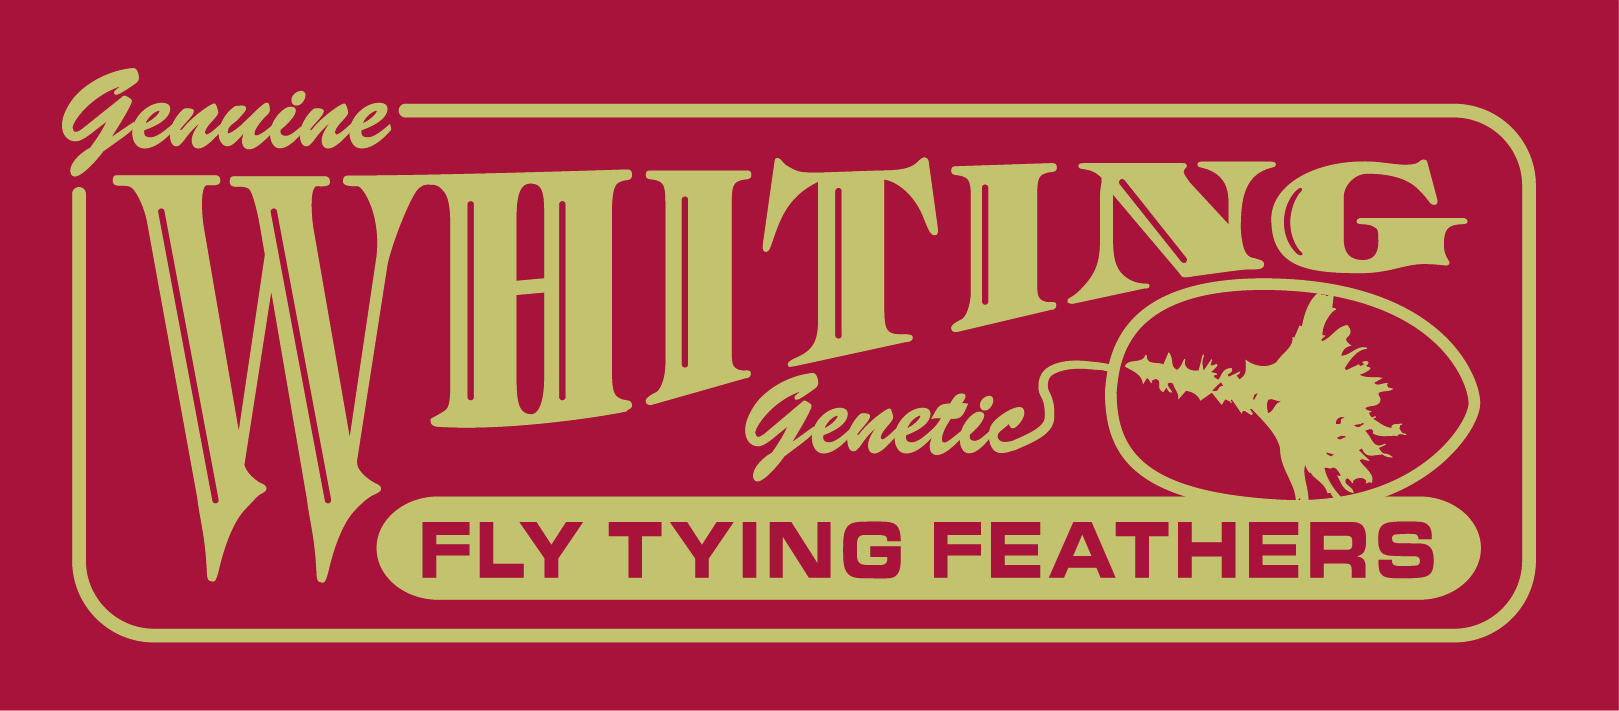 Whiting Farms Fly Tying Feathers